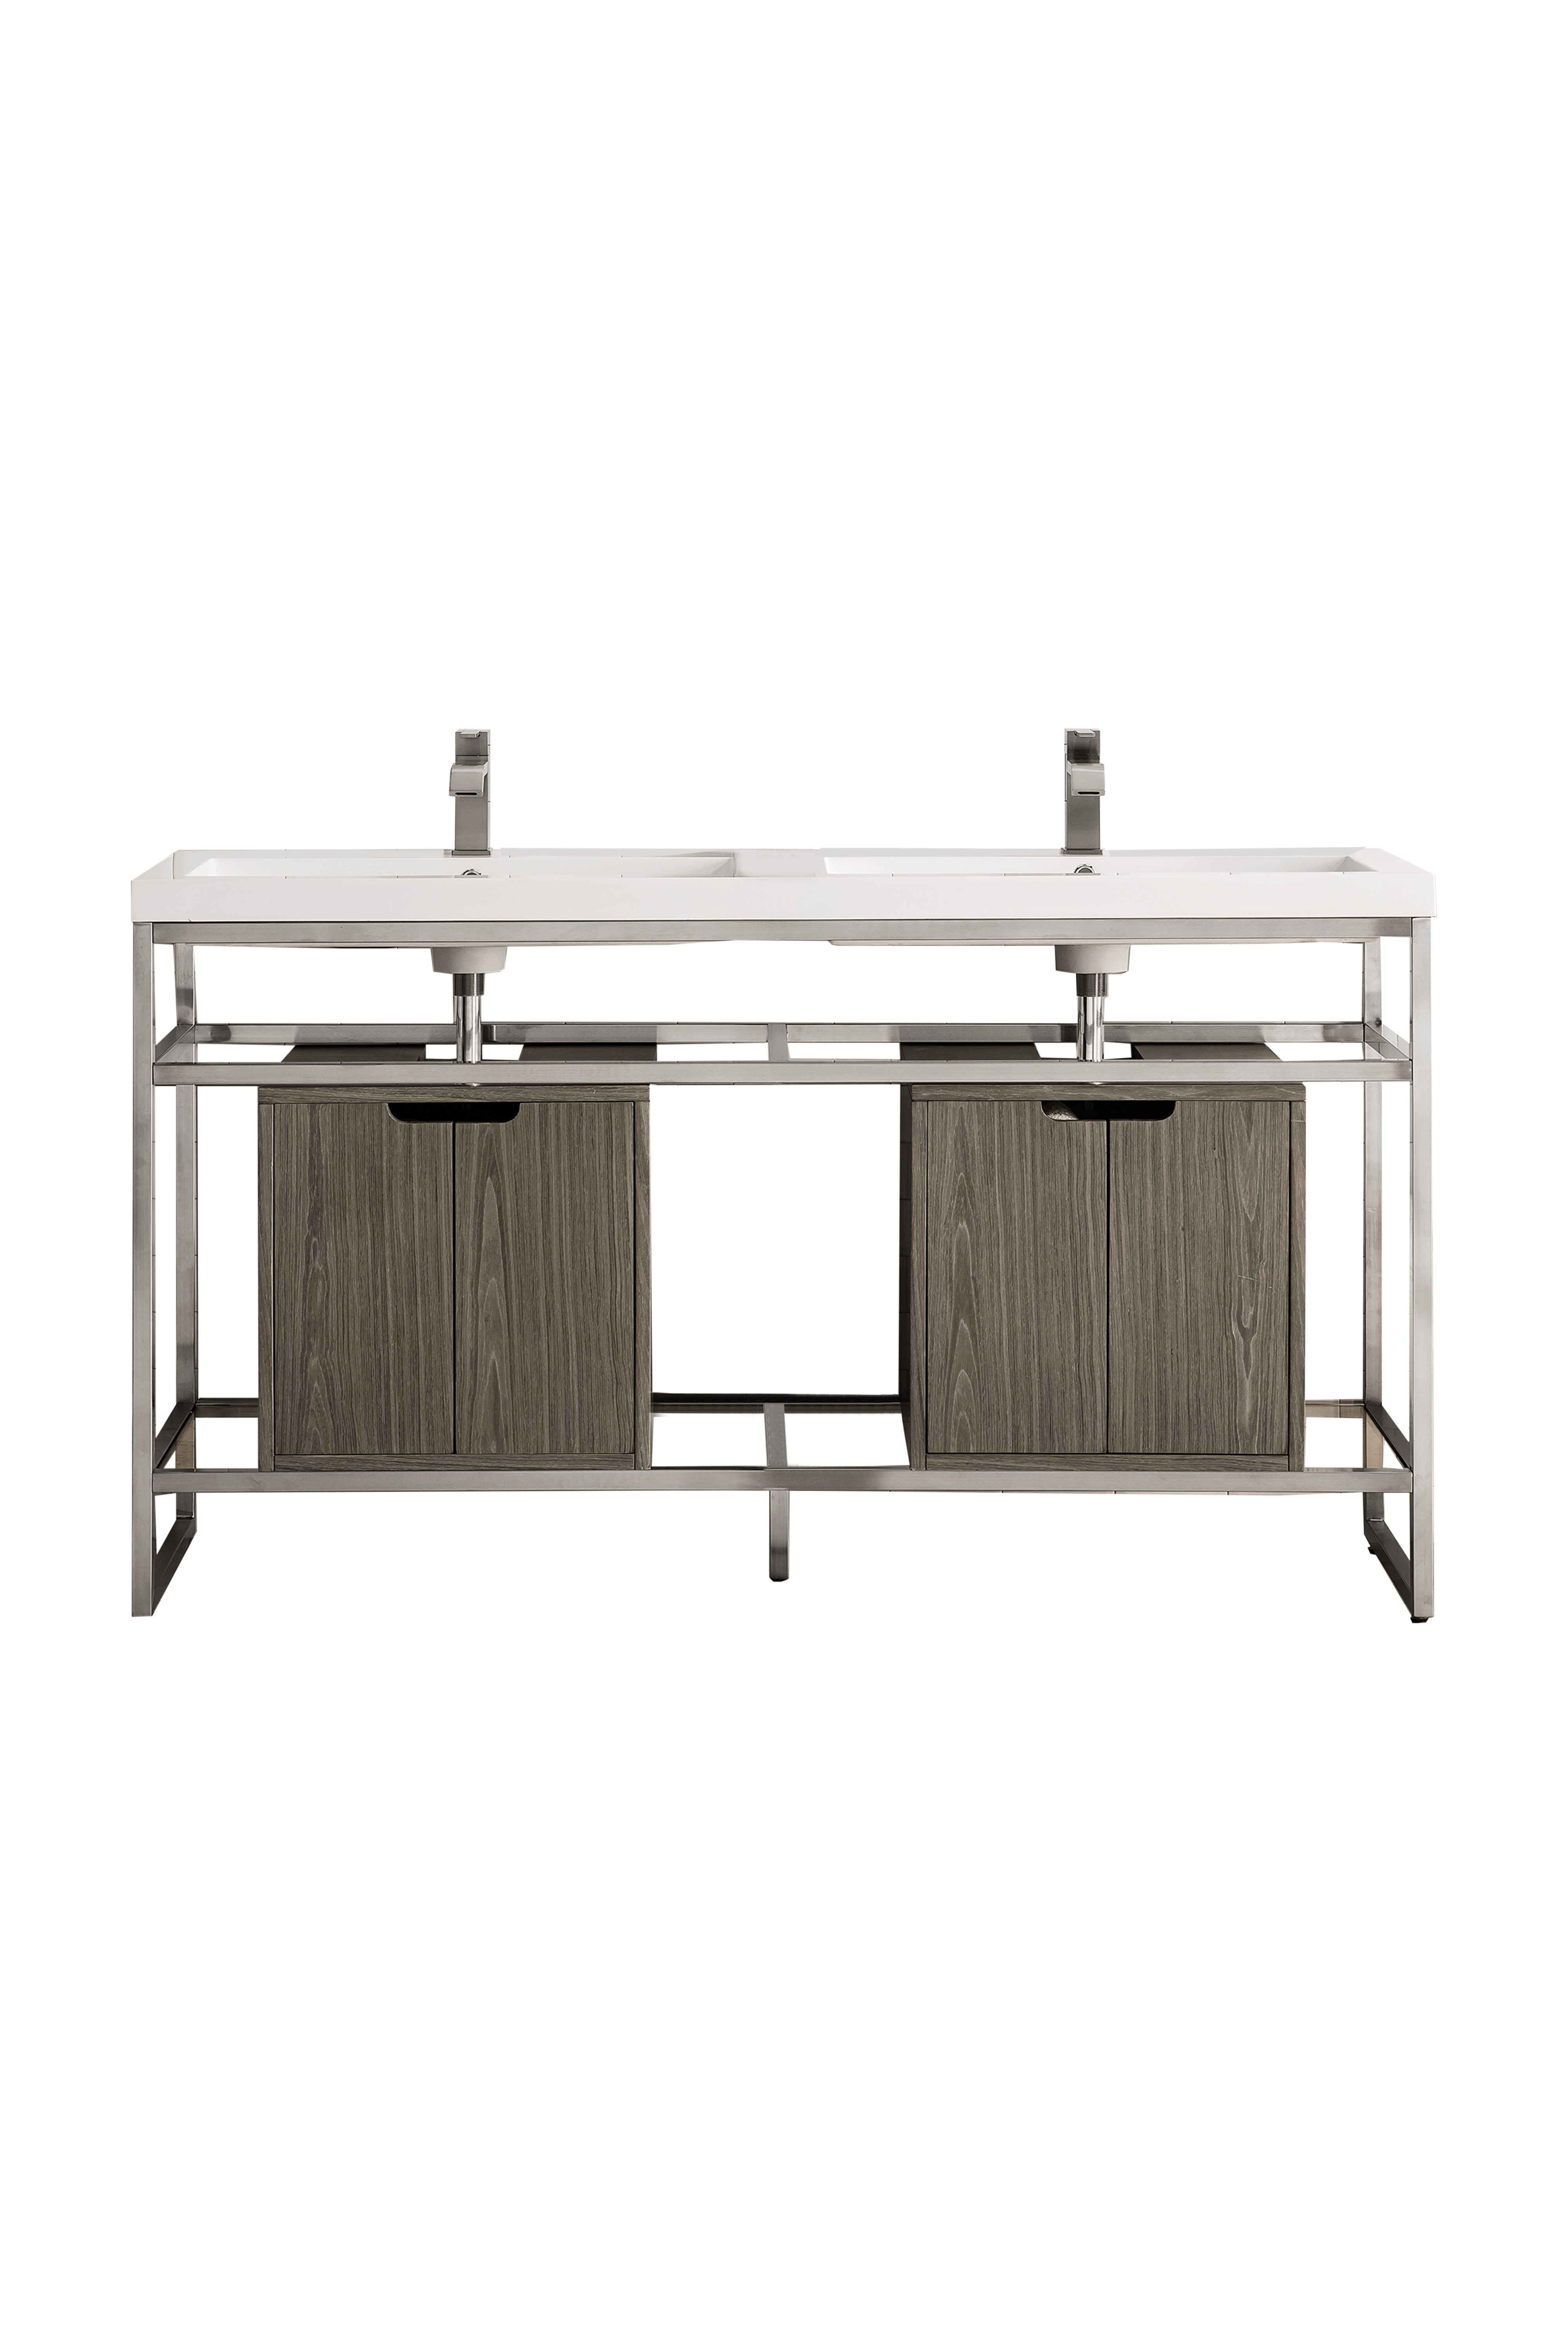 James Martin C105V63BNKSCAGRWG Boston 63" Stainless Steel Sink Console (Double Basins), Brushed Nickel w/ Ash Gray Storage Cabinet, White Glossy Composite Countertop